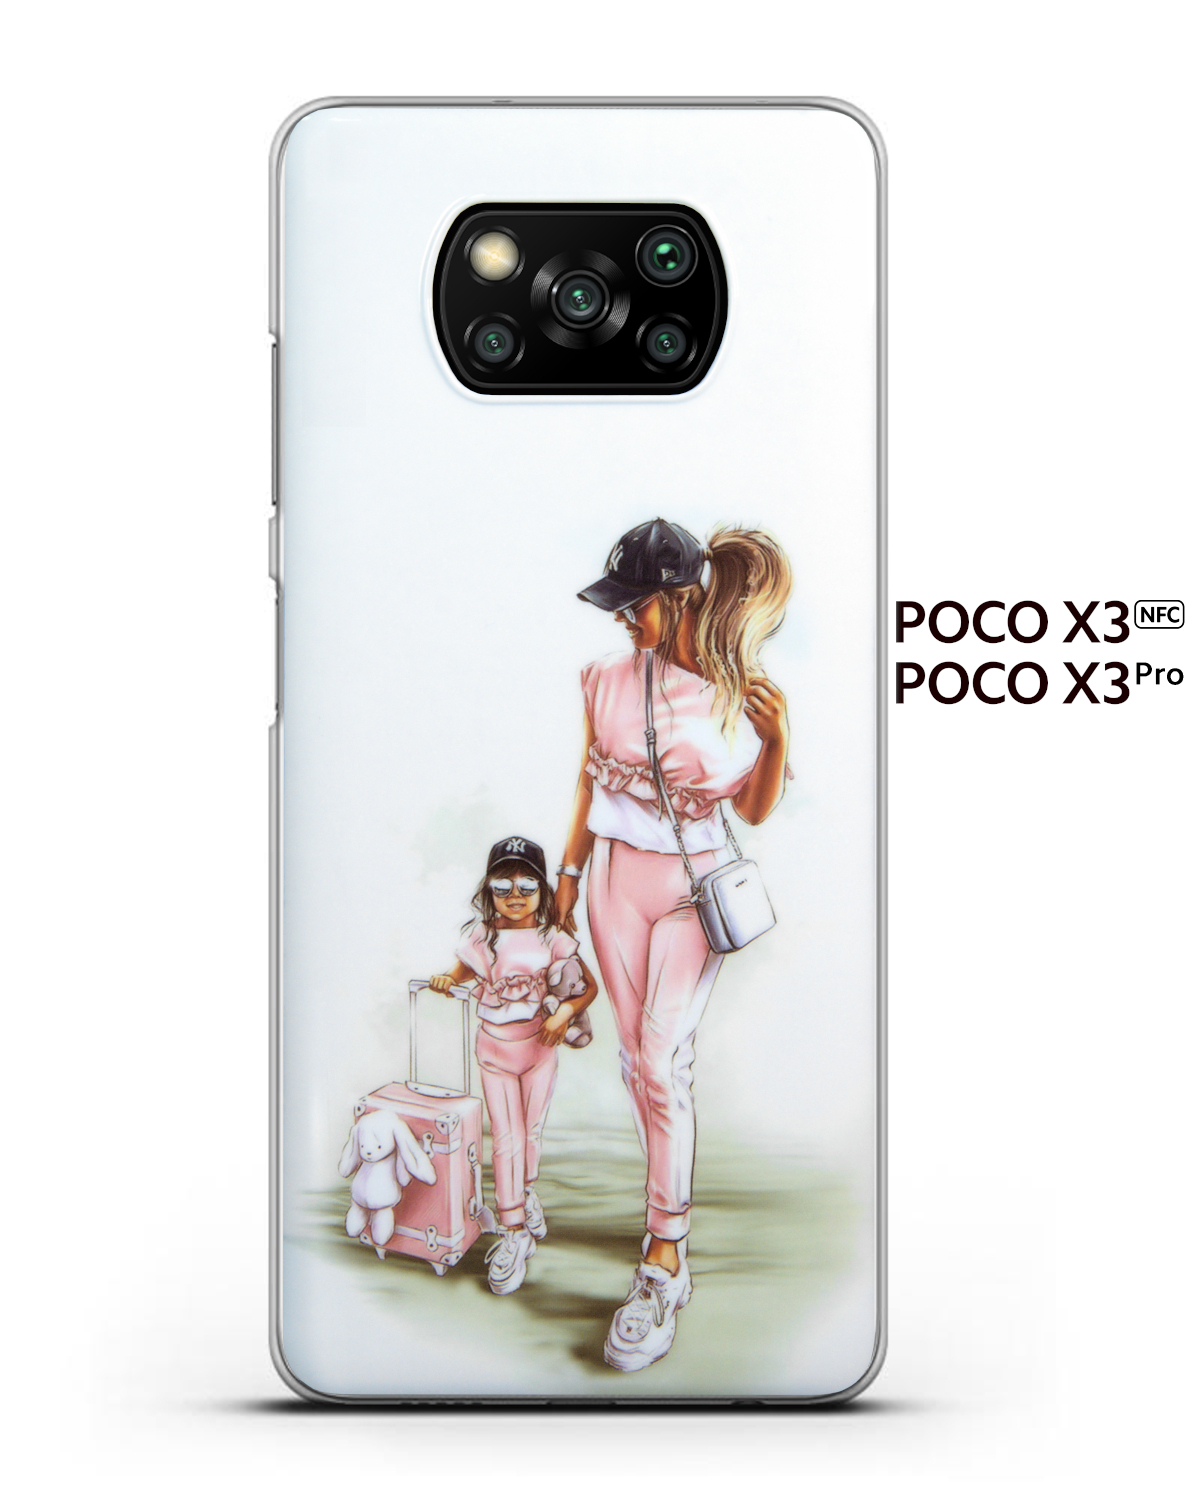 Get Lost in Sensual Bliss with Poco X3 Pro 256GB